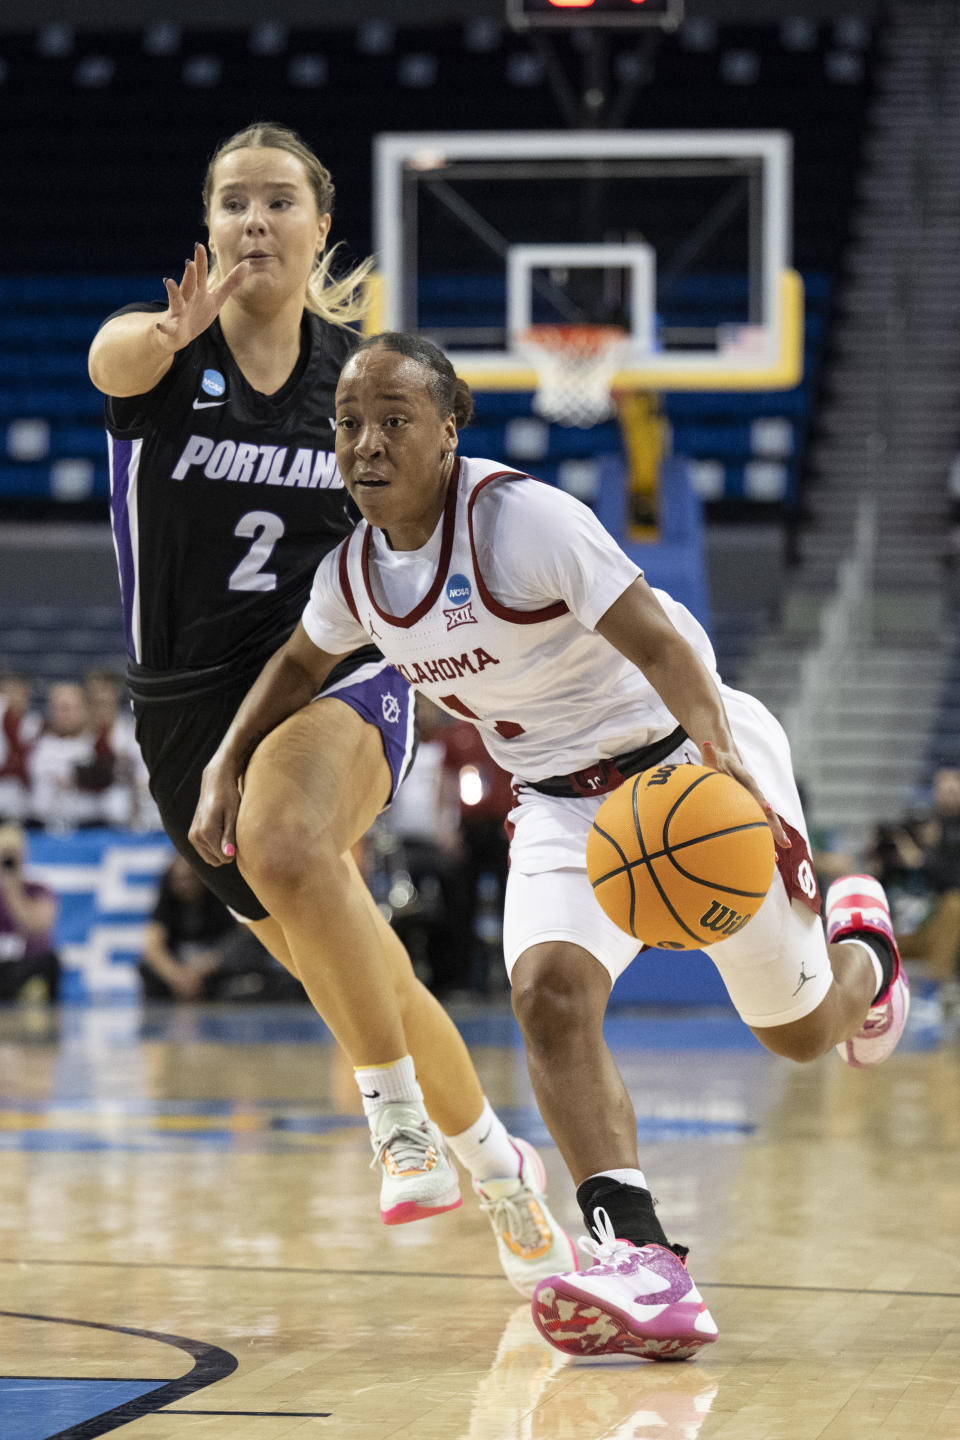 Portland guard McKelle Meek (1) drives toward the basket past Portland forward Keeley Frawley (2) during the first half of a first-round college basketball game in the women's NCAA Tournament, Saturday, March 18, 2023, in Los Angeles. (AP Photo/Kyusung Gong)